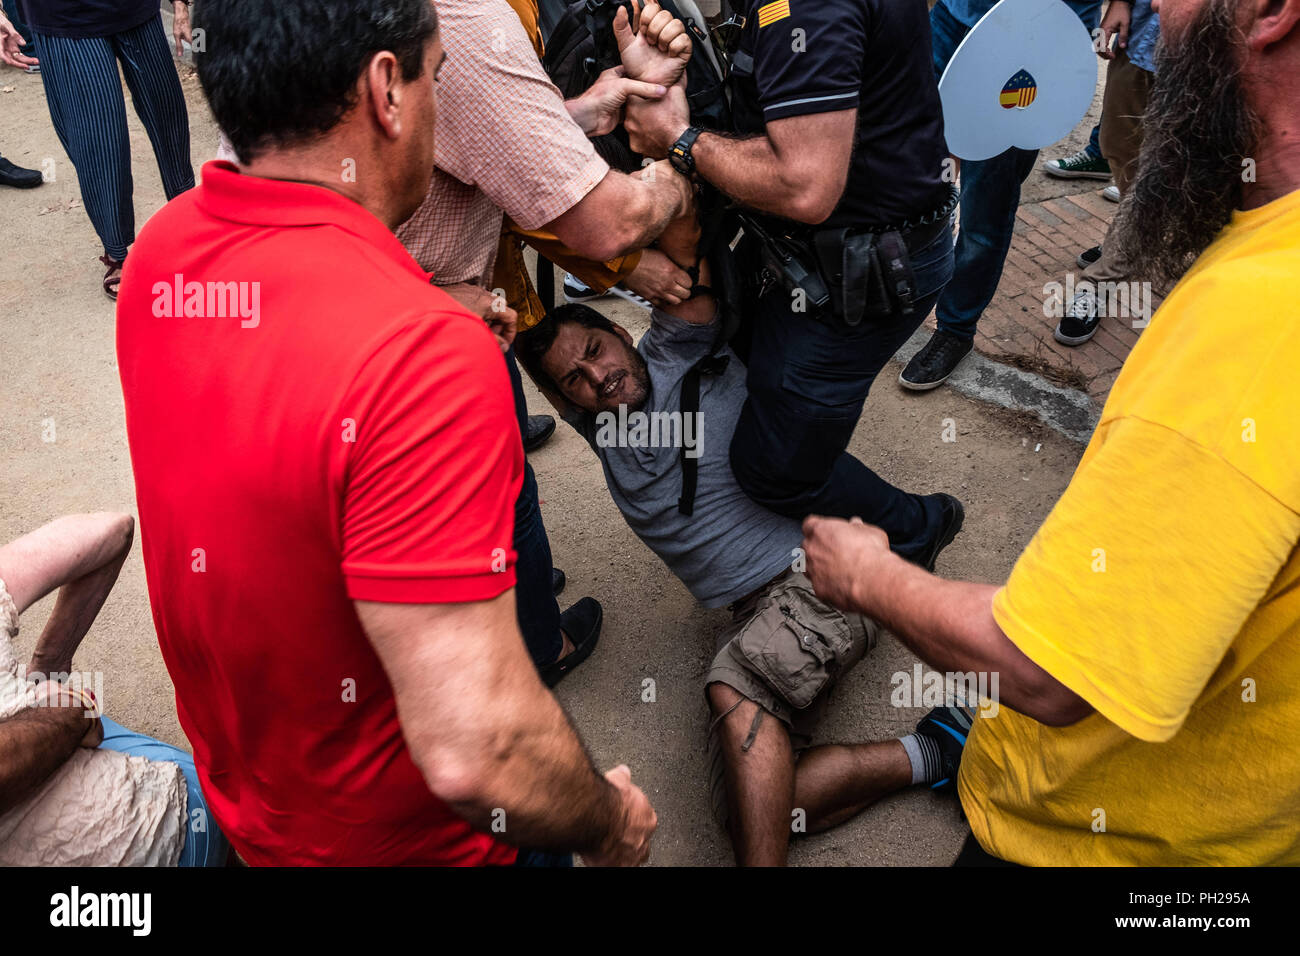 Barcelona, Catalonia, Spain. 29th Aug, 2018. The gypsy Romanian activist Lagarde Danciu seen confronting the demonstrators.Hundreds of people gathered in Barcelona protesting supporting the withdrawal of the yellow ties of the Catalan independence movement and supporting the woman allegedly assaulted when retying ties in the park of the CIutadella. Credit: Paco Freire/SOPA Images/ZUMA Wire/Alamy Live News Stock Photo